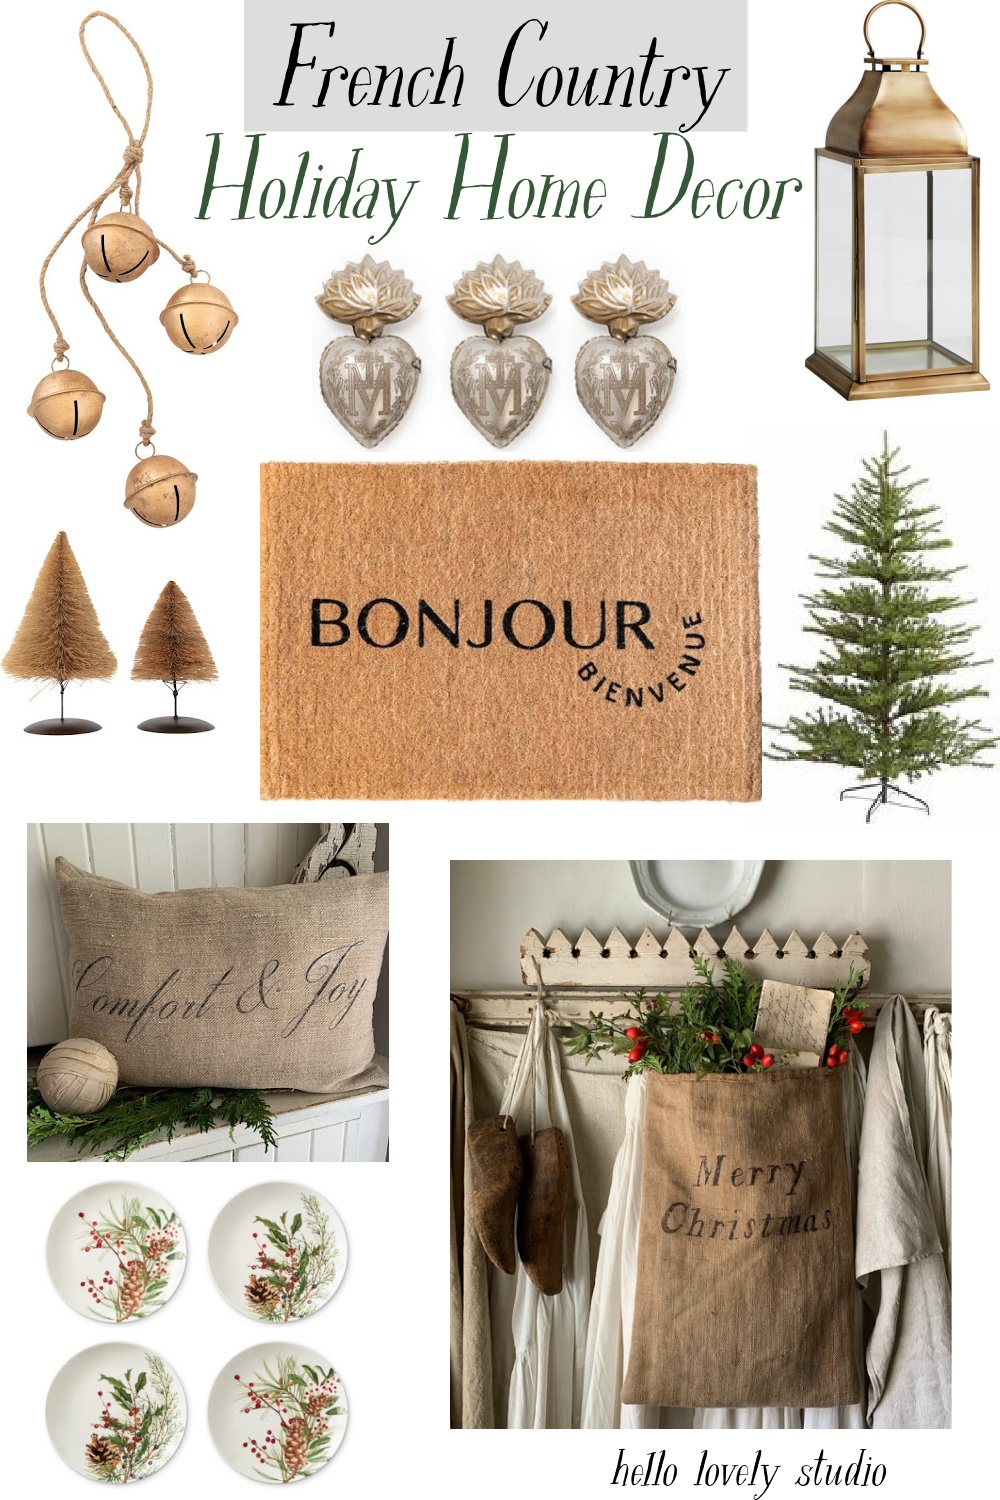 French Country Holiday Home Decor - Hello Lovely Studio. #frenchfarmhouse #frenchchristmas #frenchcountry #hoildaydecor #christmasdecor